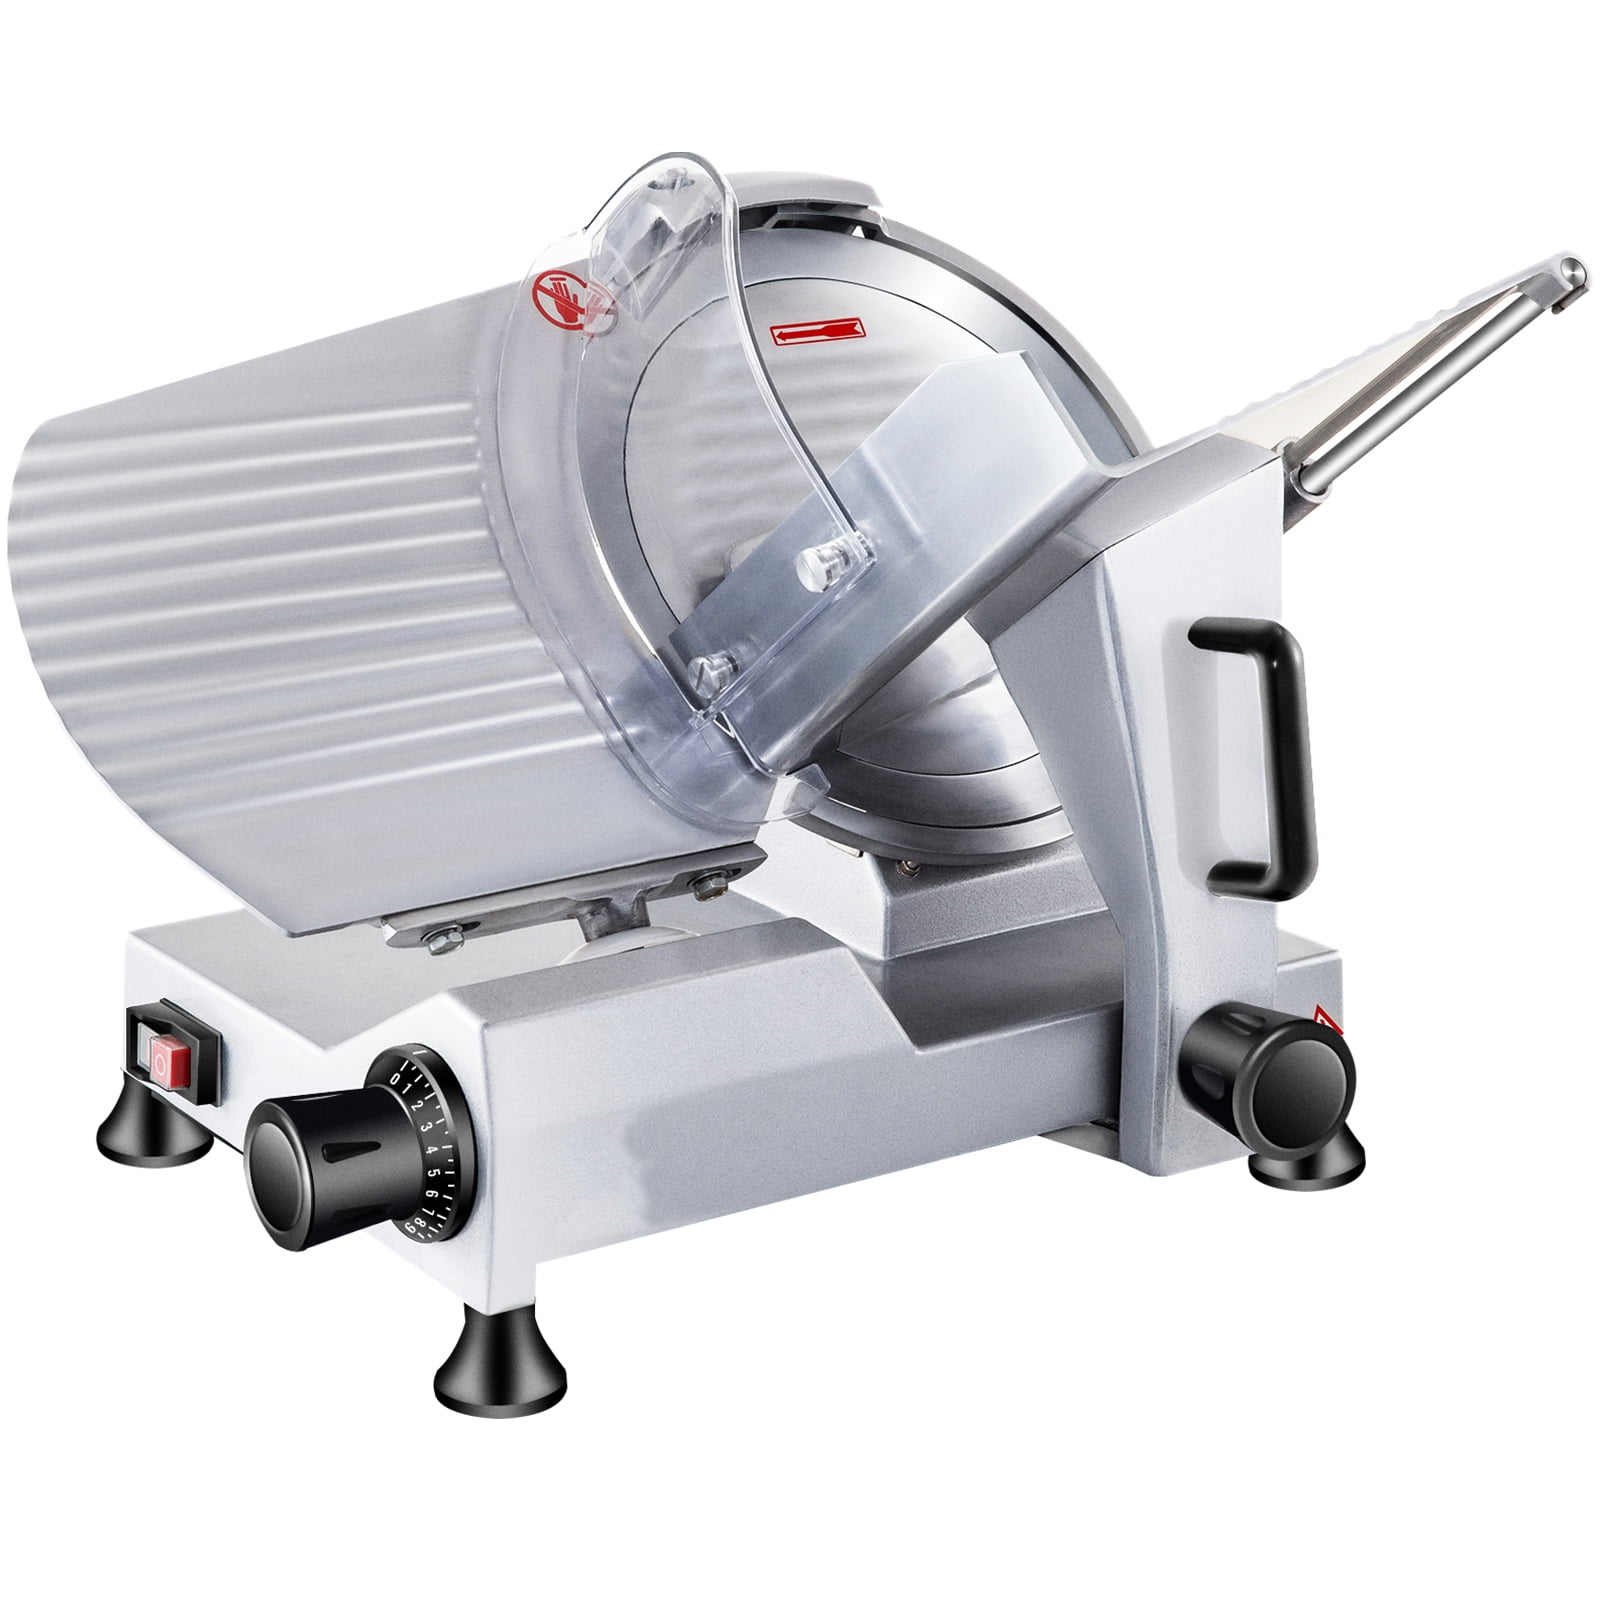 Yescom 10 inch Meat Slicer 240W 530RPM Commercial Electric Slicer Cheese Food Deli Stainless Steel Cutter